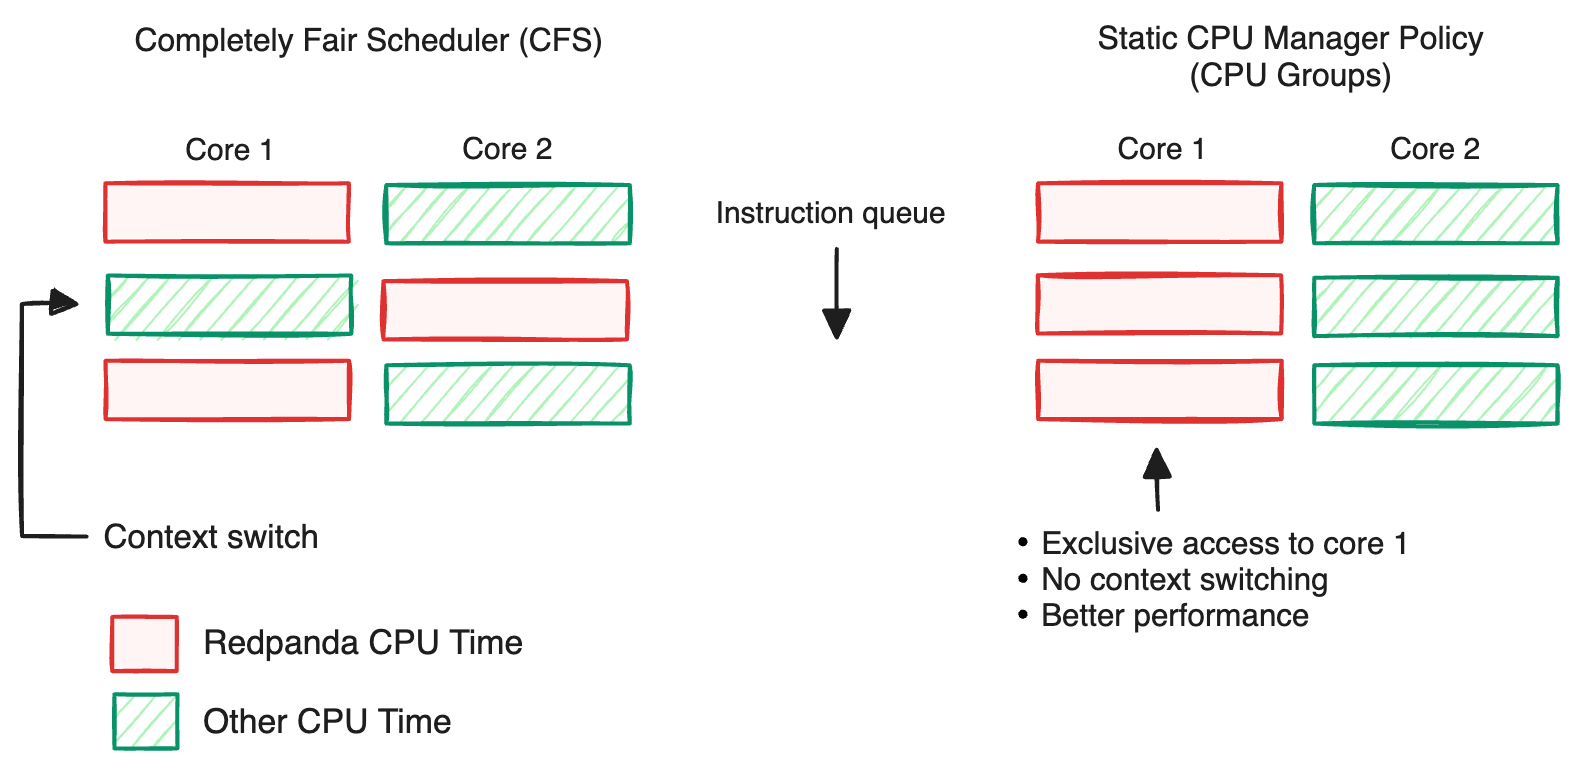 Comparison of context switching between CFS and the static CPU Manager Policy